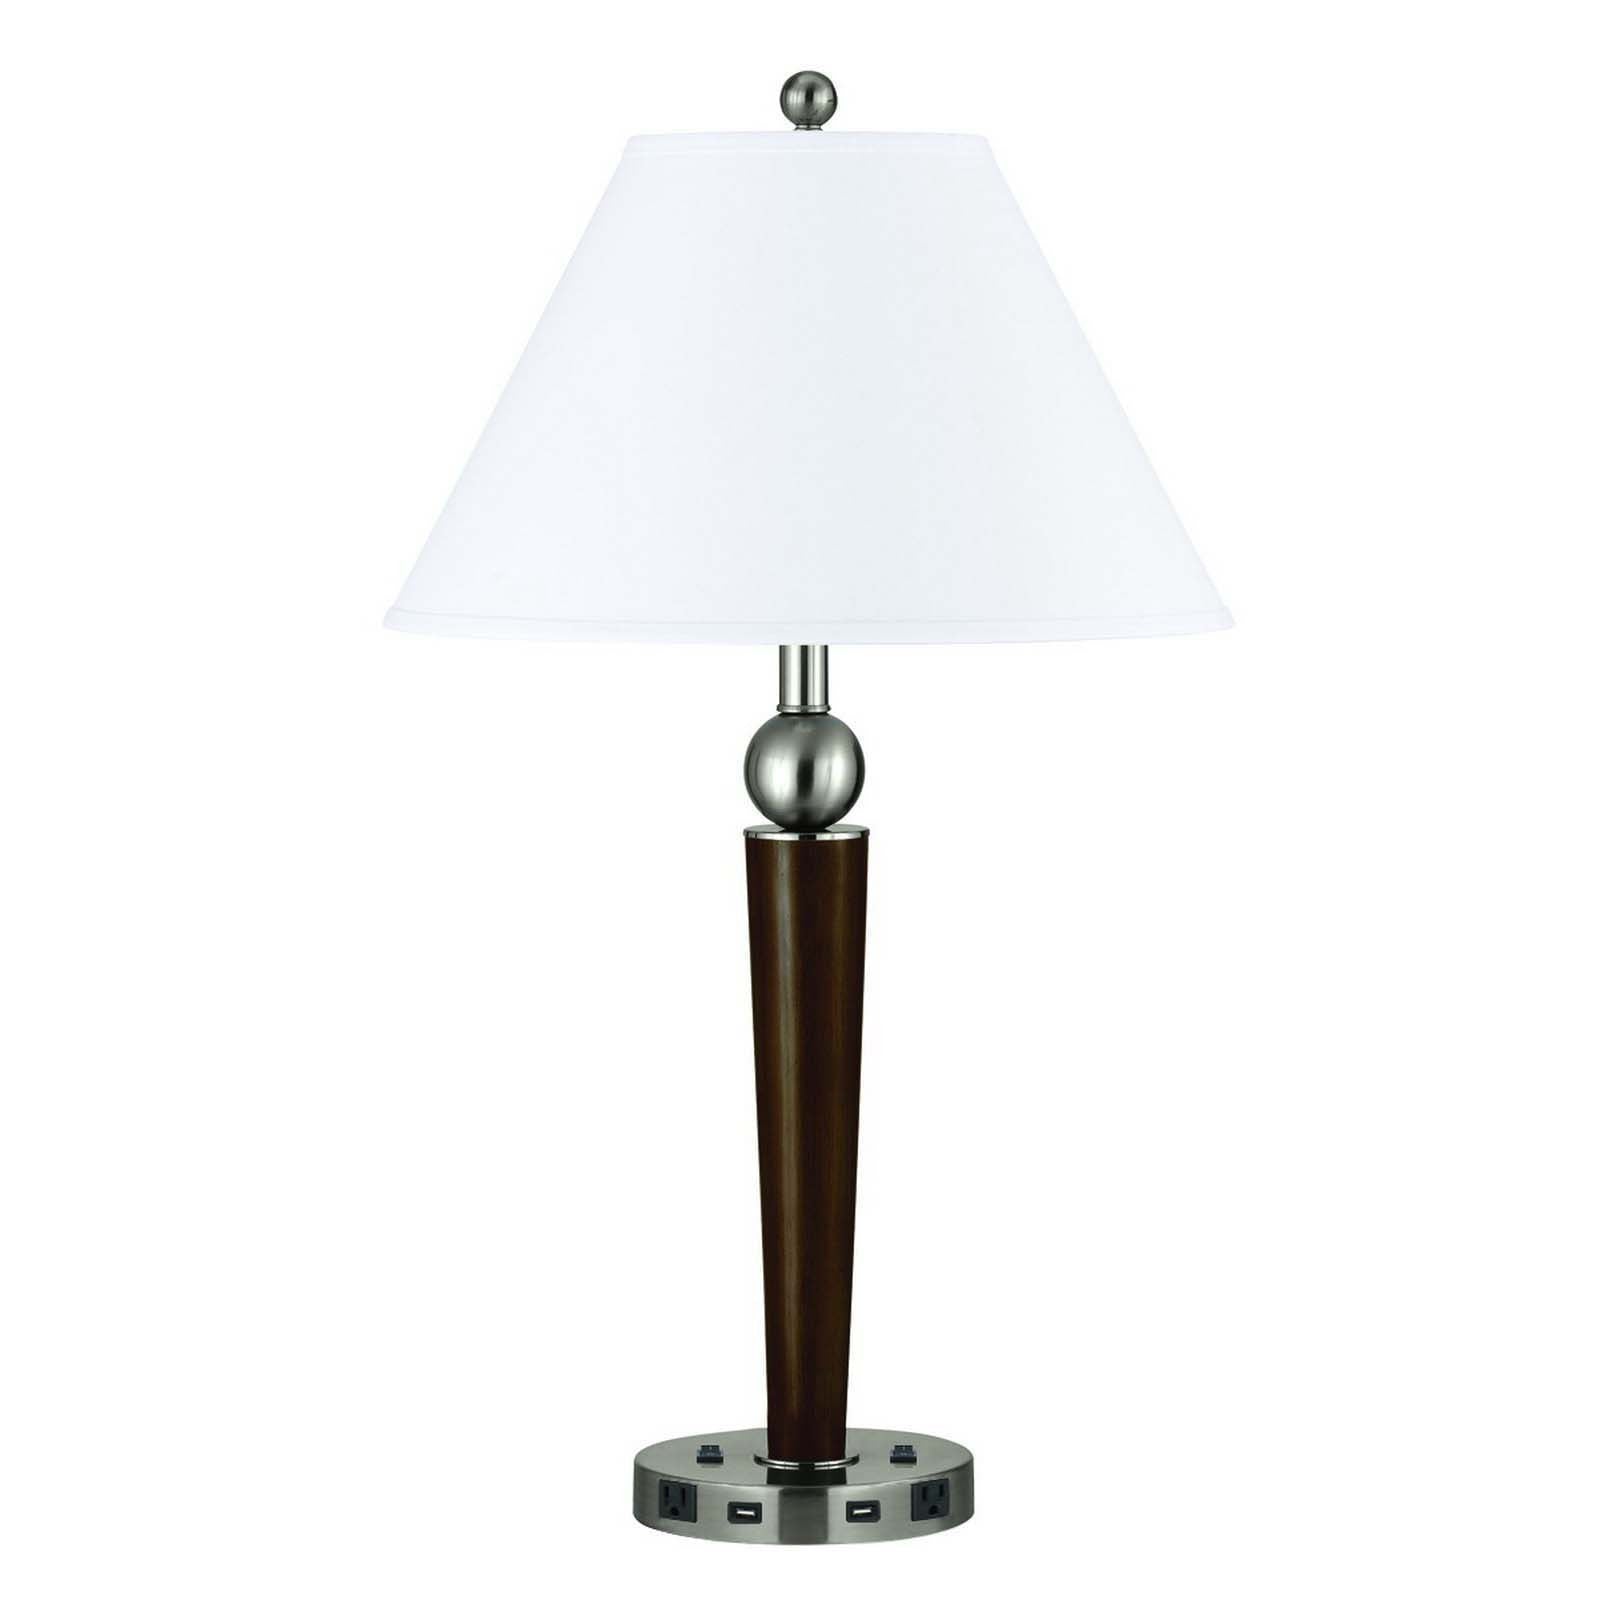 29" Nickel Metal Two Light Usb Table Lamp With White Empire Shade